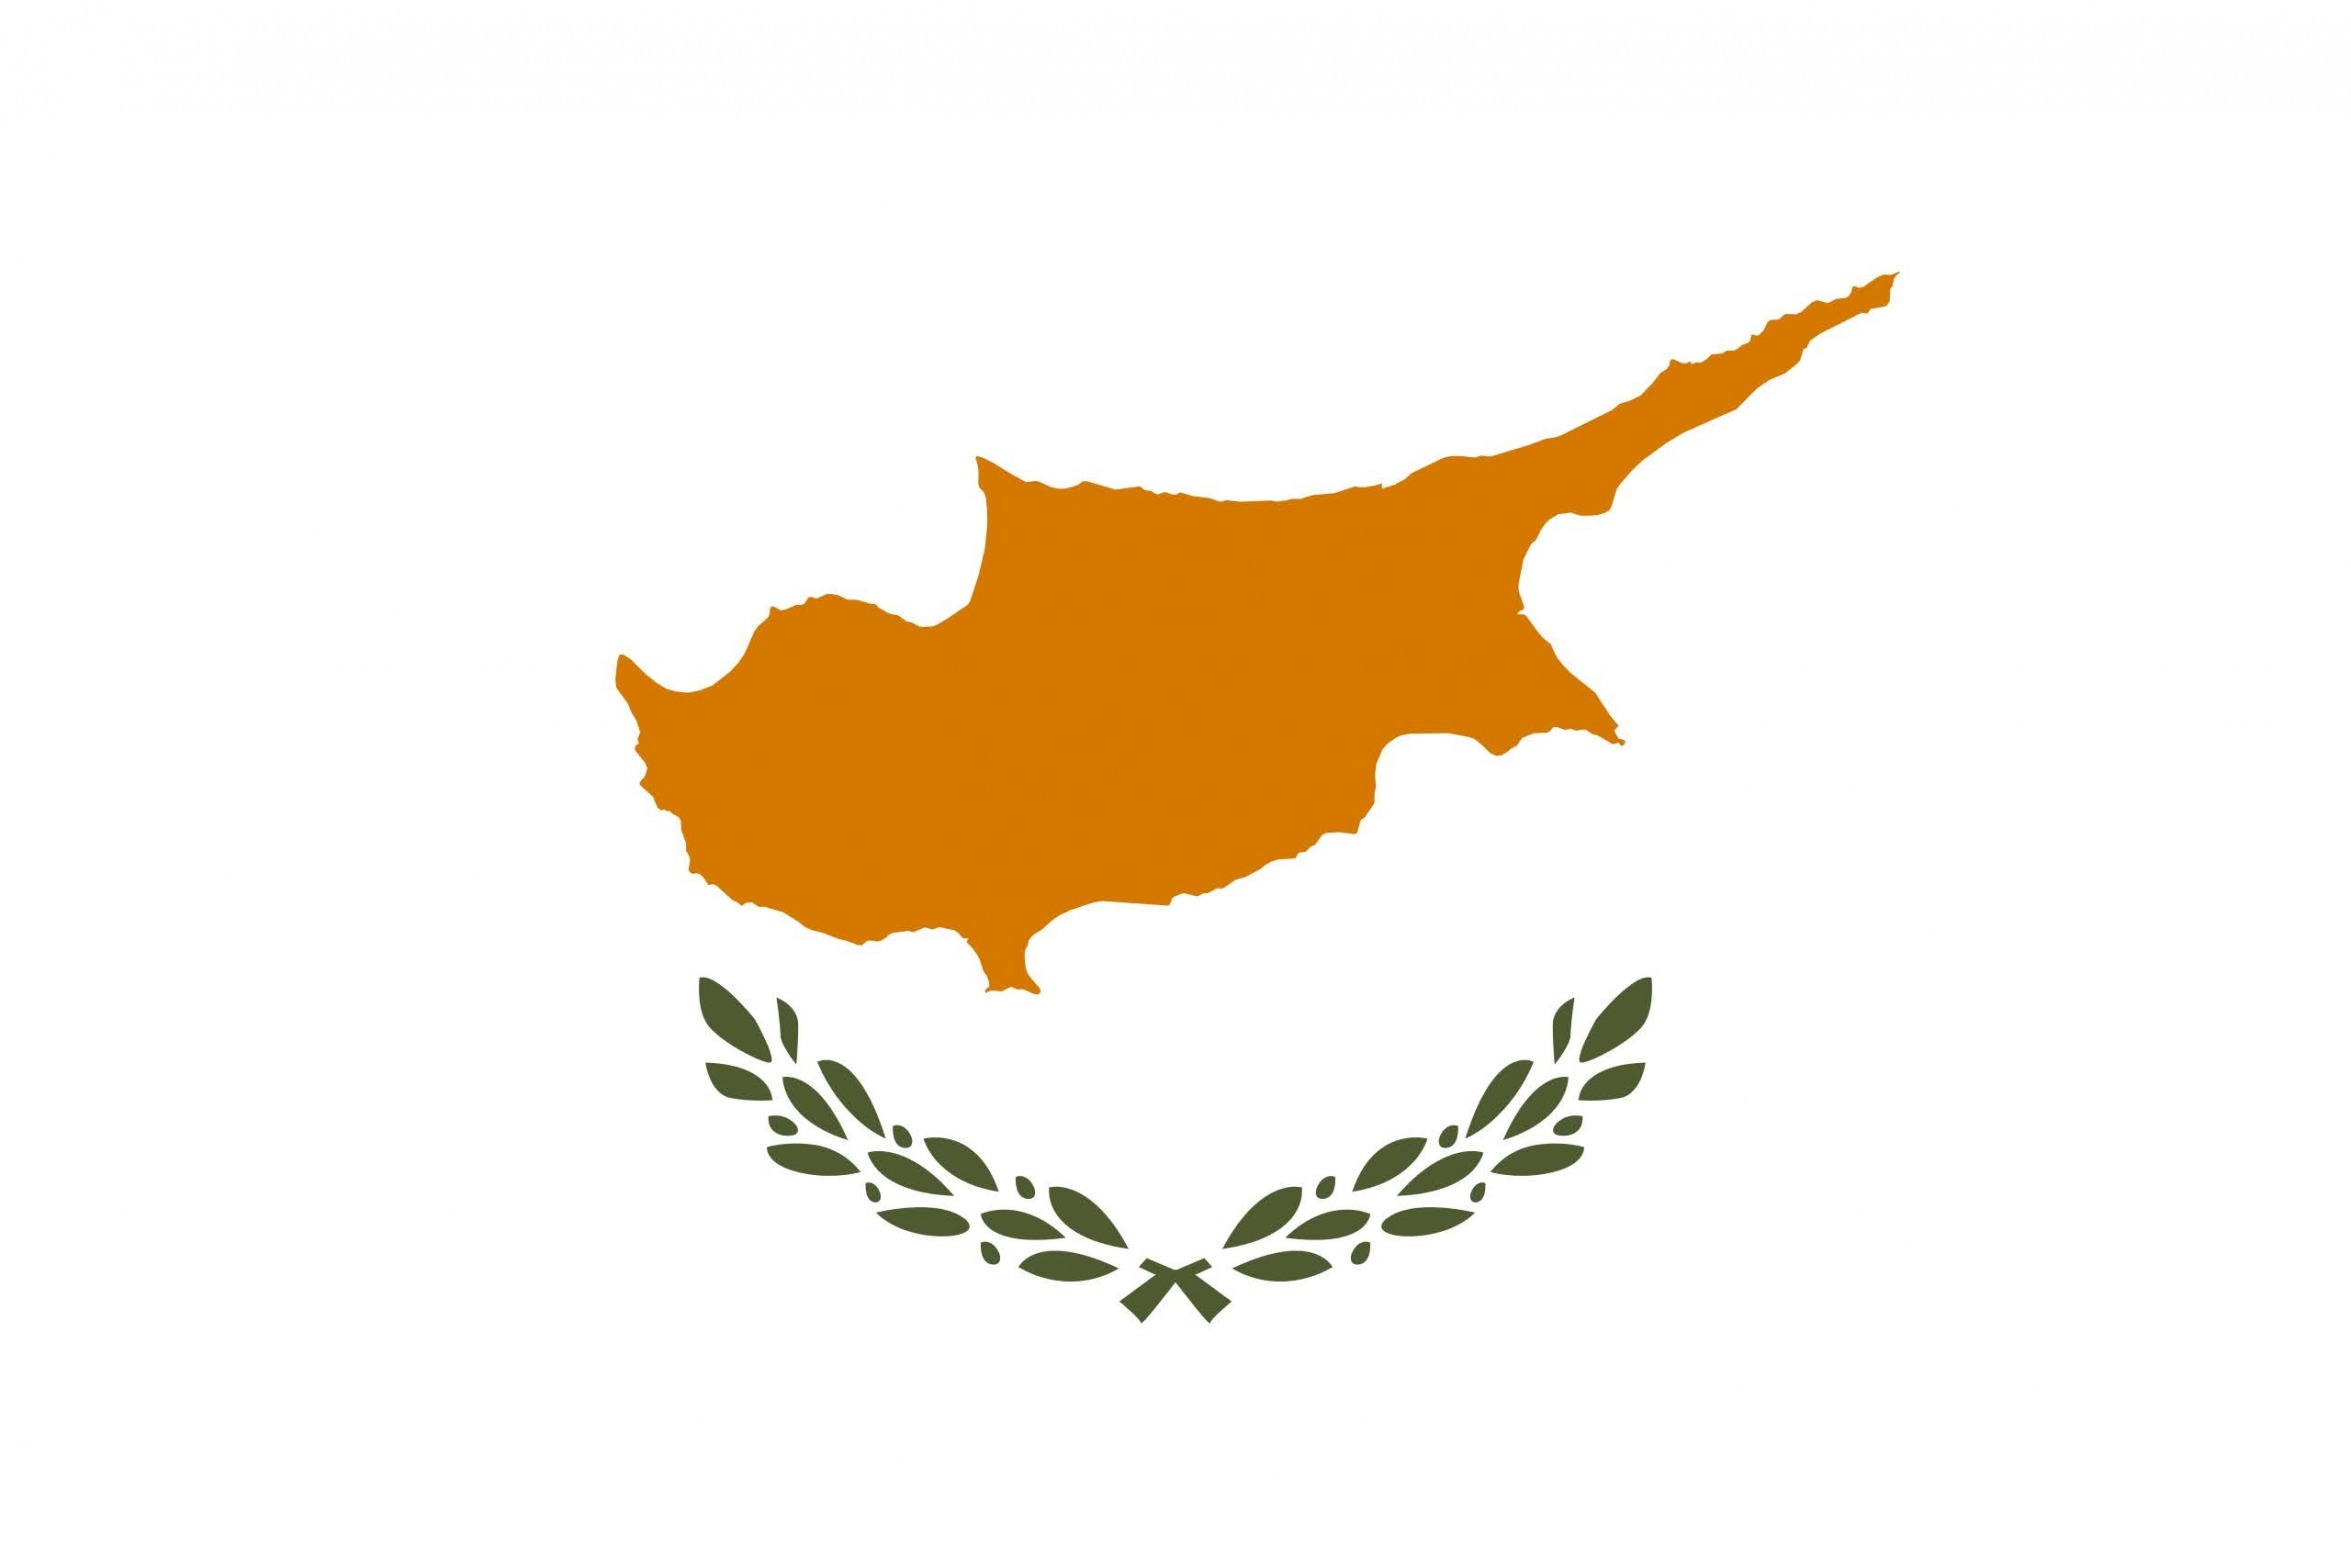 he Cypriot flag